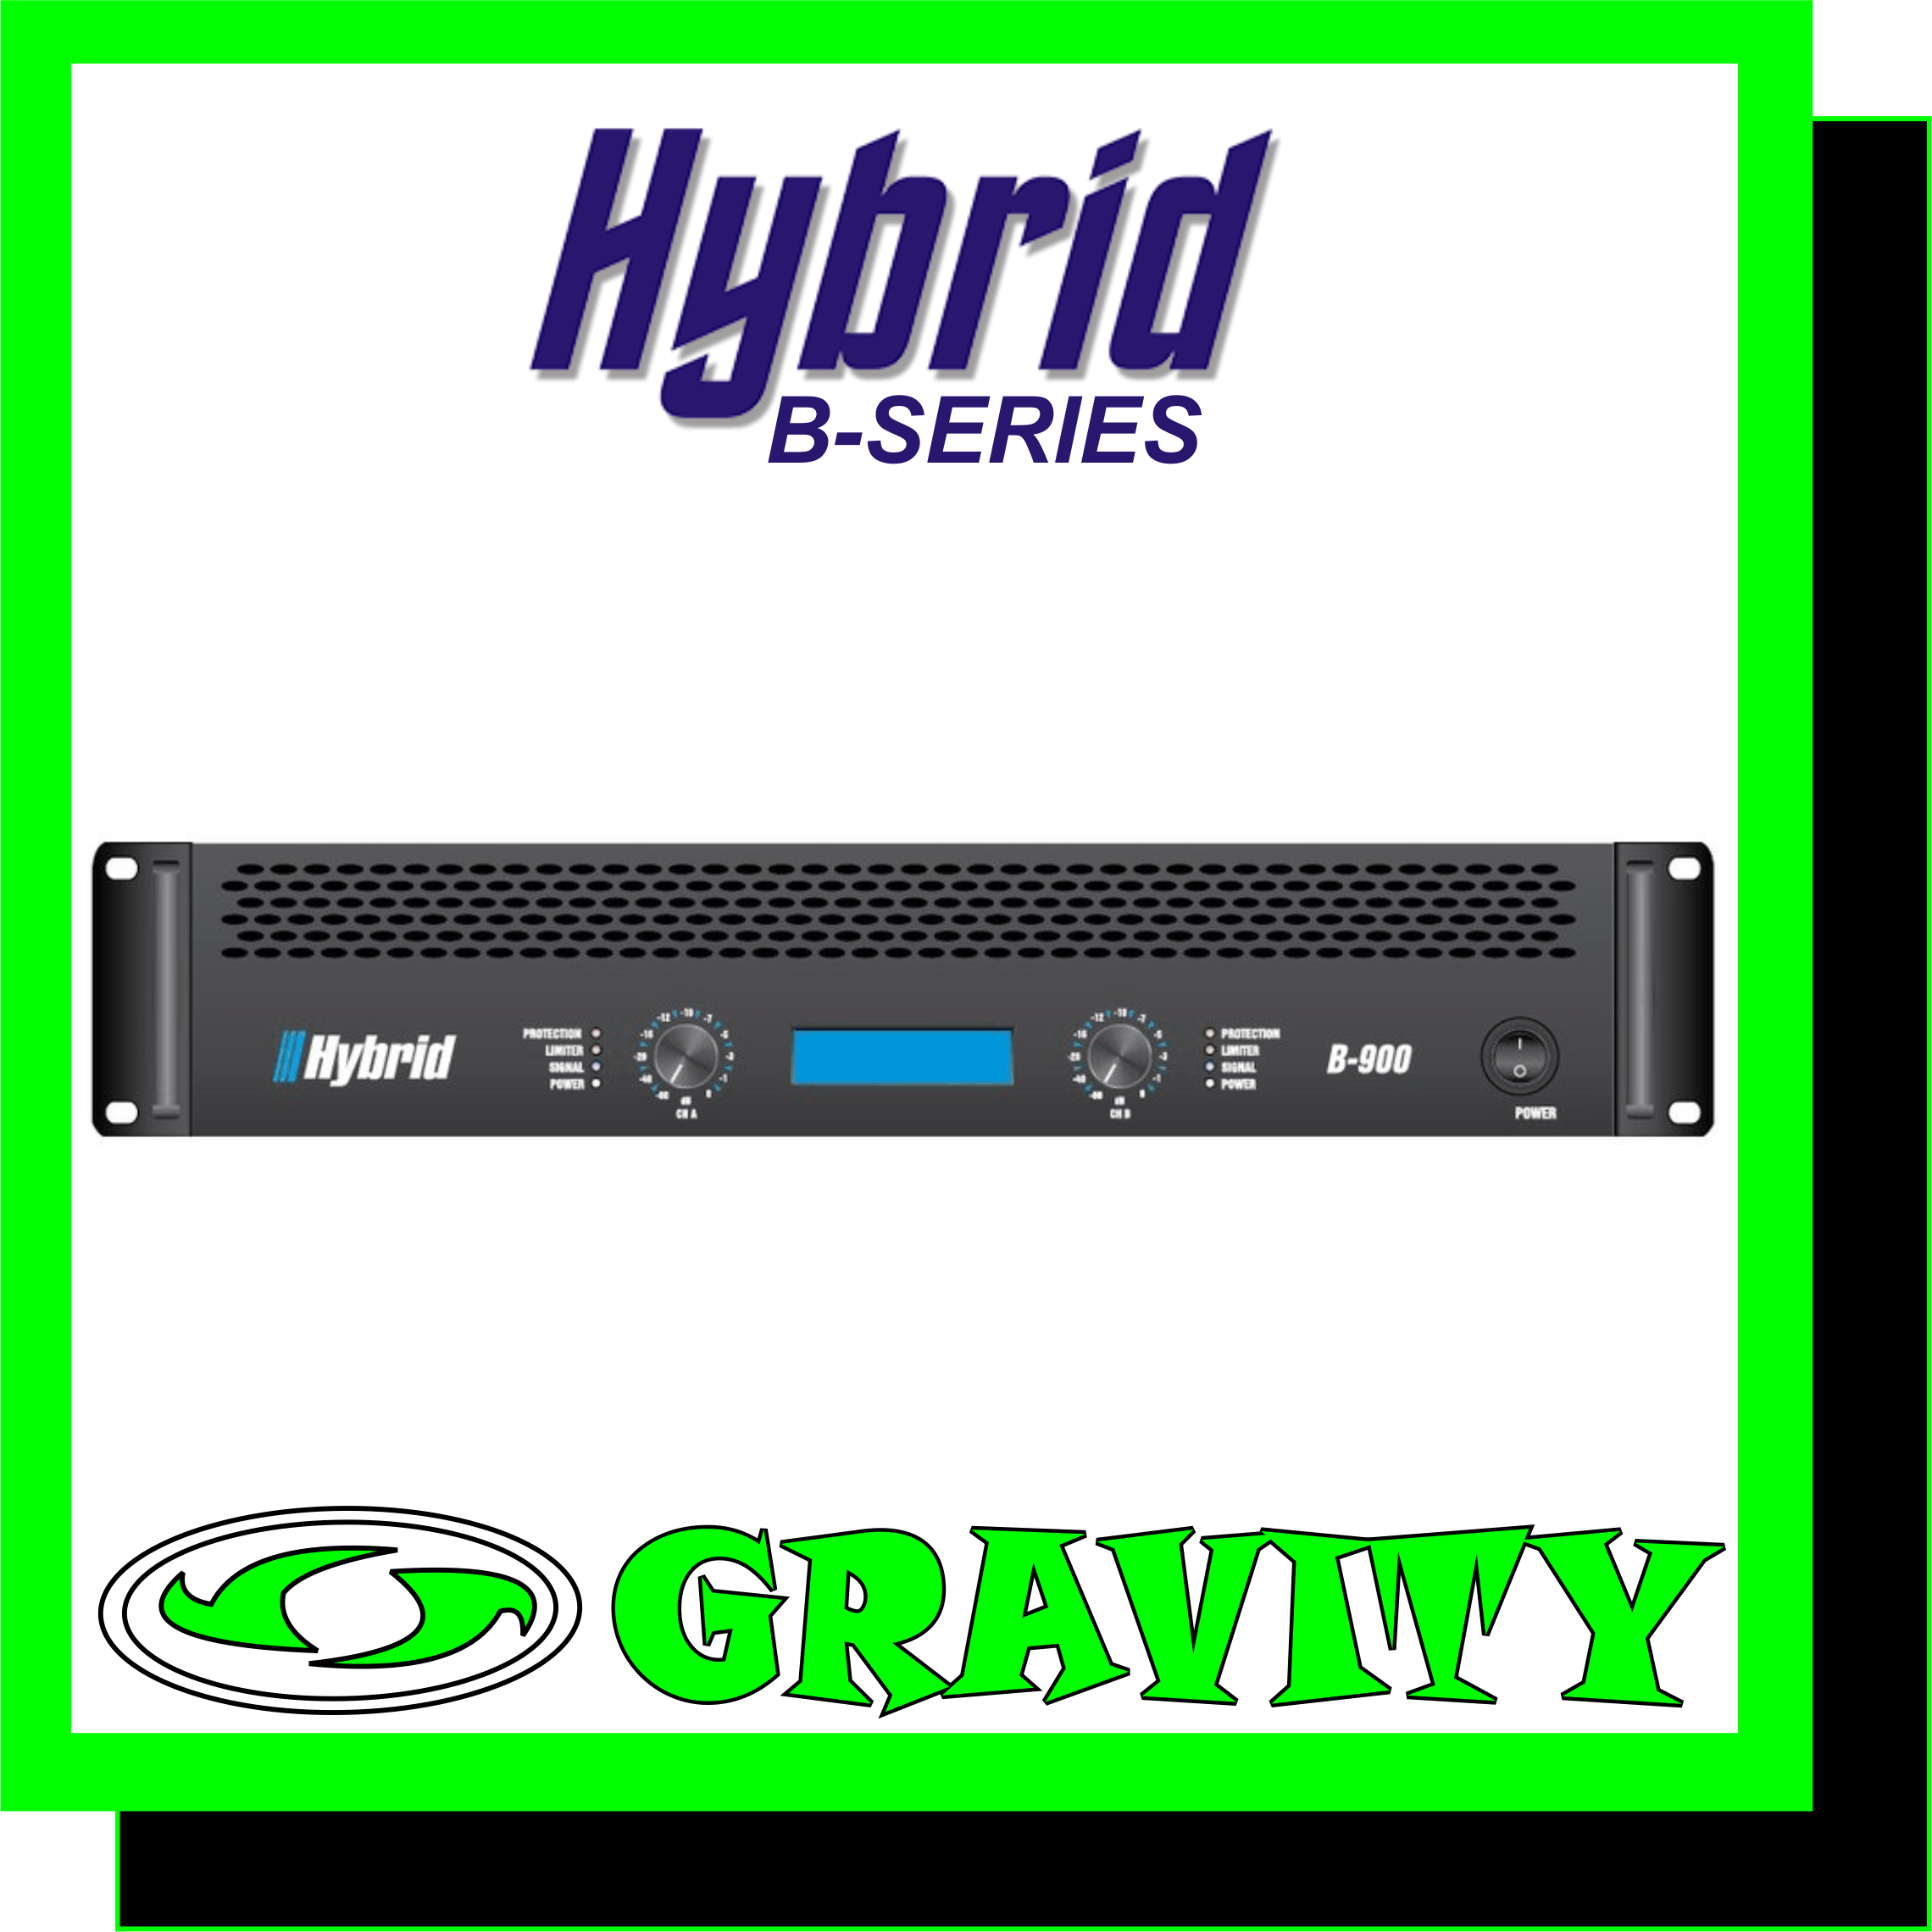 Hybrid B900 MK5 2x450W  8Ohm Setreo Power .RMS/CH 450W 4Ohm Setreo Power .RMS/CH 700W 2Ohm Setreo Power .RMS/CH 750W 8Ohm Bridged Mono Power . RMS 1400W 4Ohm Bridged Mono Power . RMS 1500W  Frequency Response (+/- 3dB . 1W/8O) 20Hz 20KHz +/- 3dB Protection DC Protection . Short Circuit Protection . Thermal Protection . Inrush Current Protection . Soft Start Portection . Input and Overload Protection THD+N (20Hz-20KHz) <0.5% Damping Factor (1KHz @ 8O) >300 Hum and Noise(A weighted . -80dBW) 95dB Input Impedance (Balanced / Unbalanced) 20K Ohm / 10K Ohm Crosstalk (20Hz-20KHz Rated Power 8O) >60dB Cooling 2 x Fans . Dual speed . Front to Rear Airflow  Input Connectors Jack/Female XLR Neutrik Combo + Male XLR Neutrik Output Connectors Neutrik Speakon + Binding Post Dimensions (WxHxD) mm 482 x 397 x 88 Weight Kg 19